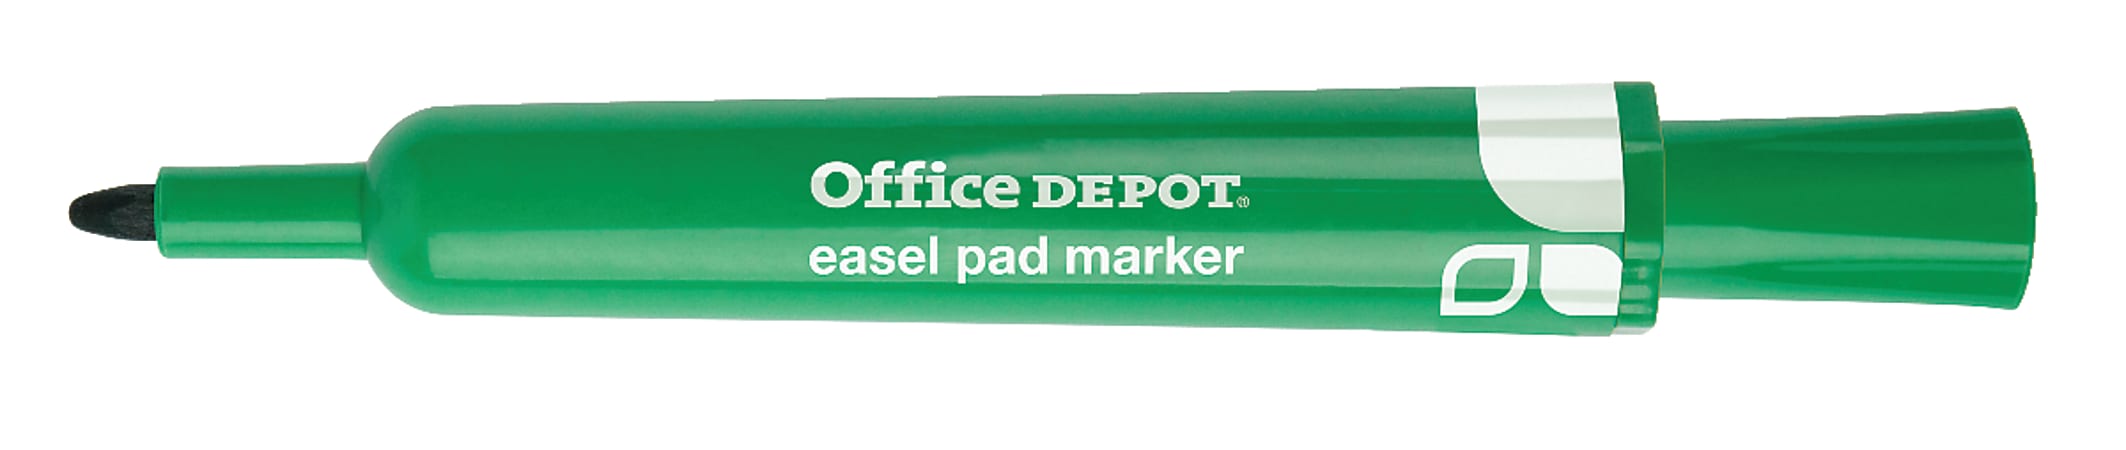 https://media.officedepot.com/images/f_auto,q_auto,e_sharpen,h_450/products/470108/470108_o05_office_depot_easel_pad_markers_8_pack/470108